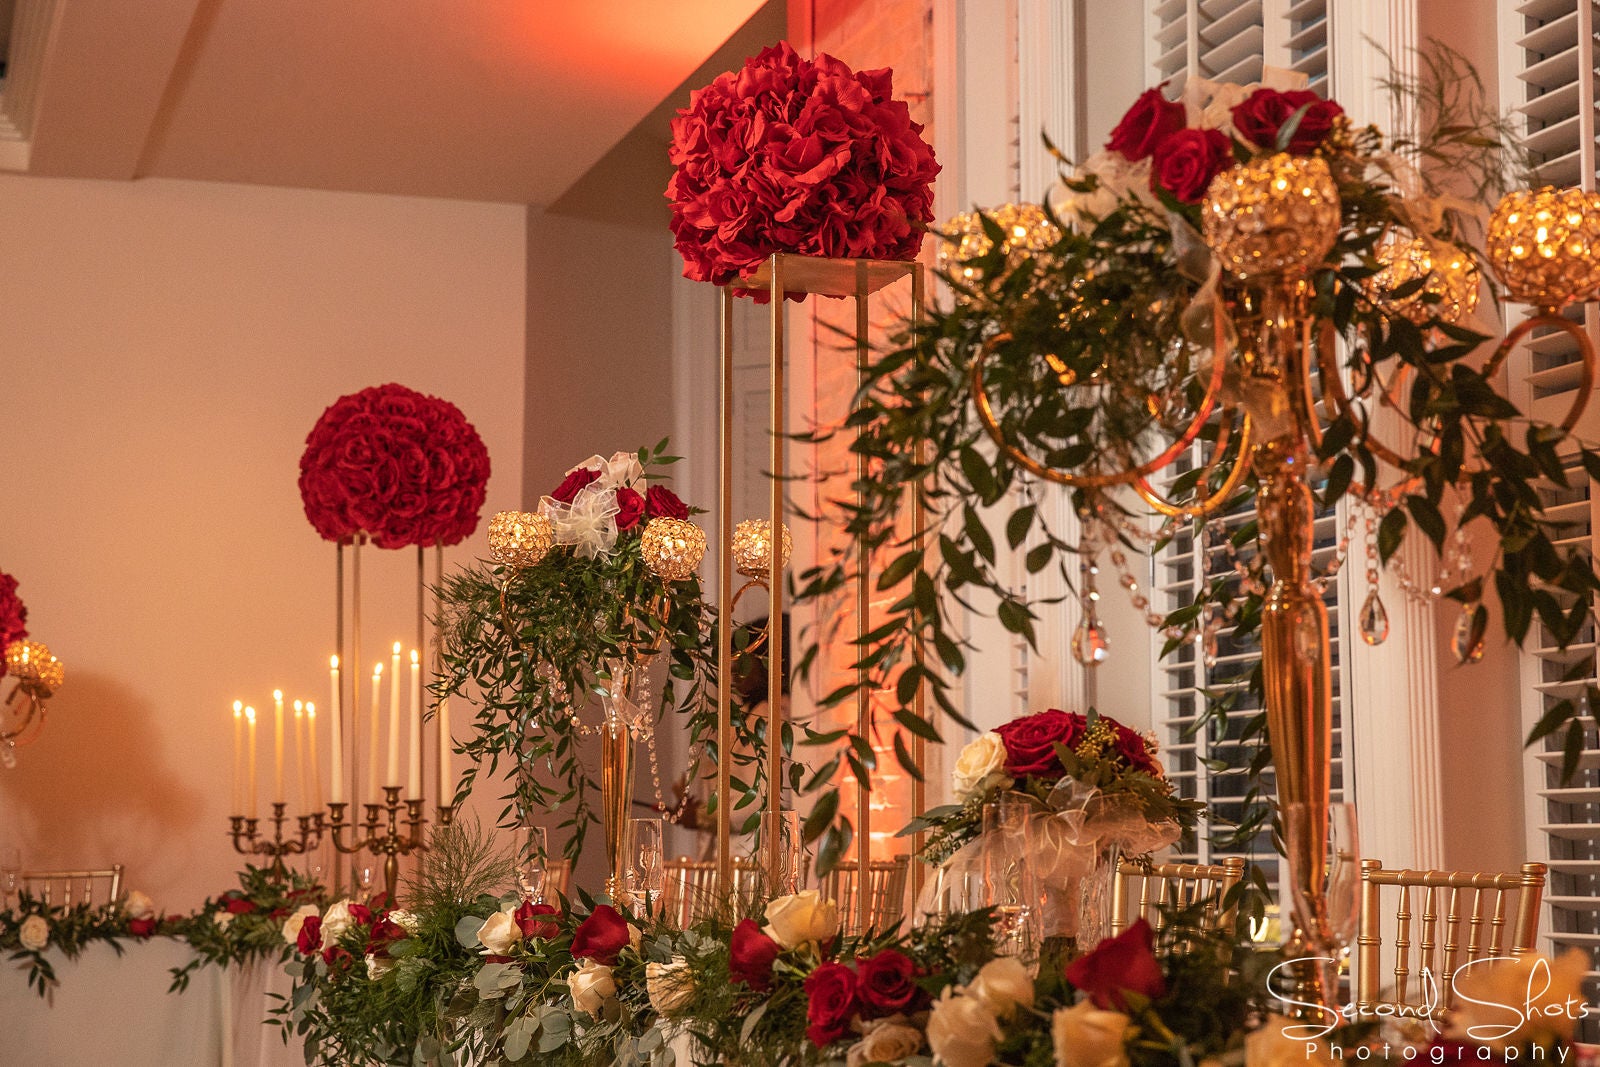 Bridal Bliss: The Roses Were Oh So Red At Krystal And Billy's Romantic Texas Wedding